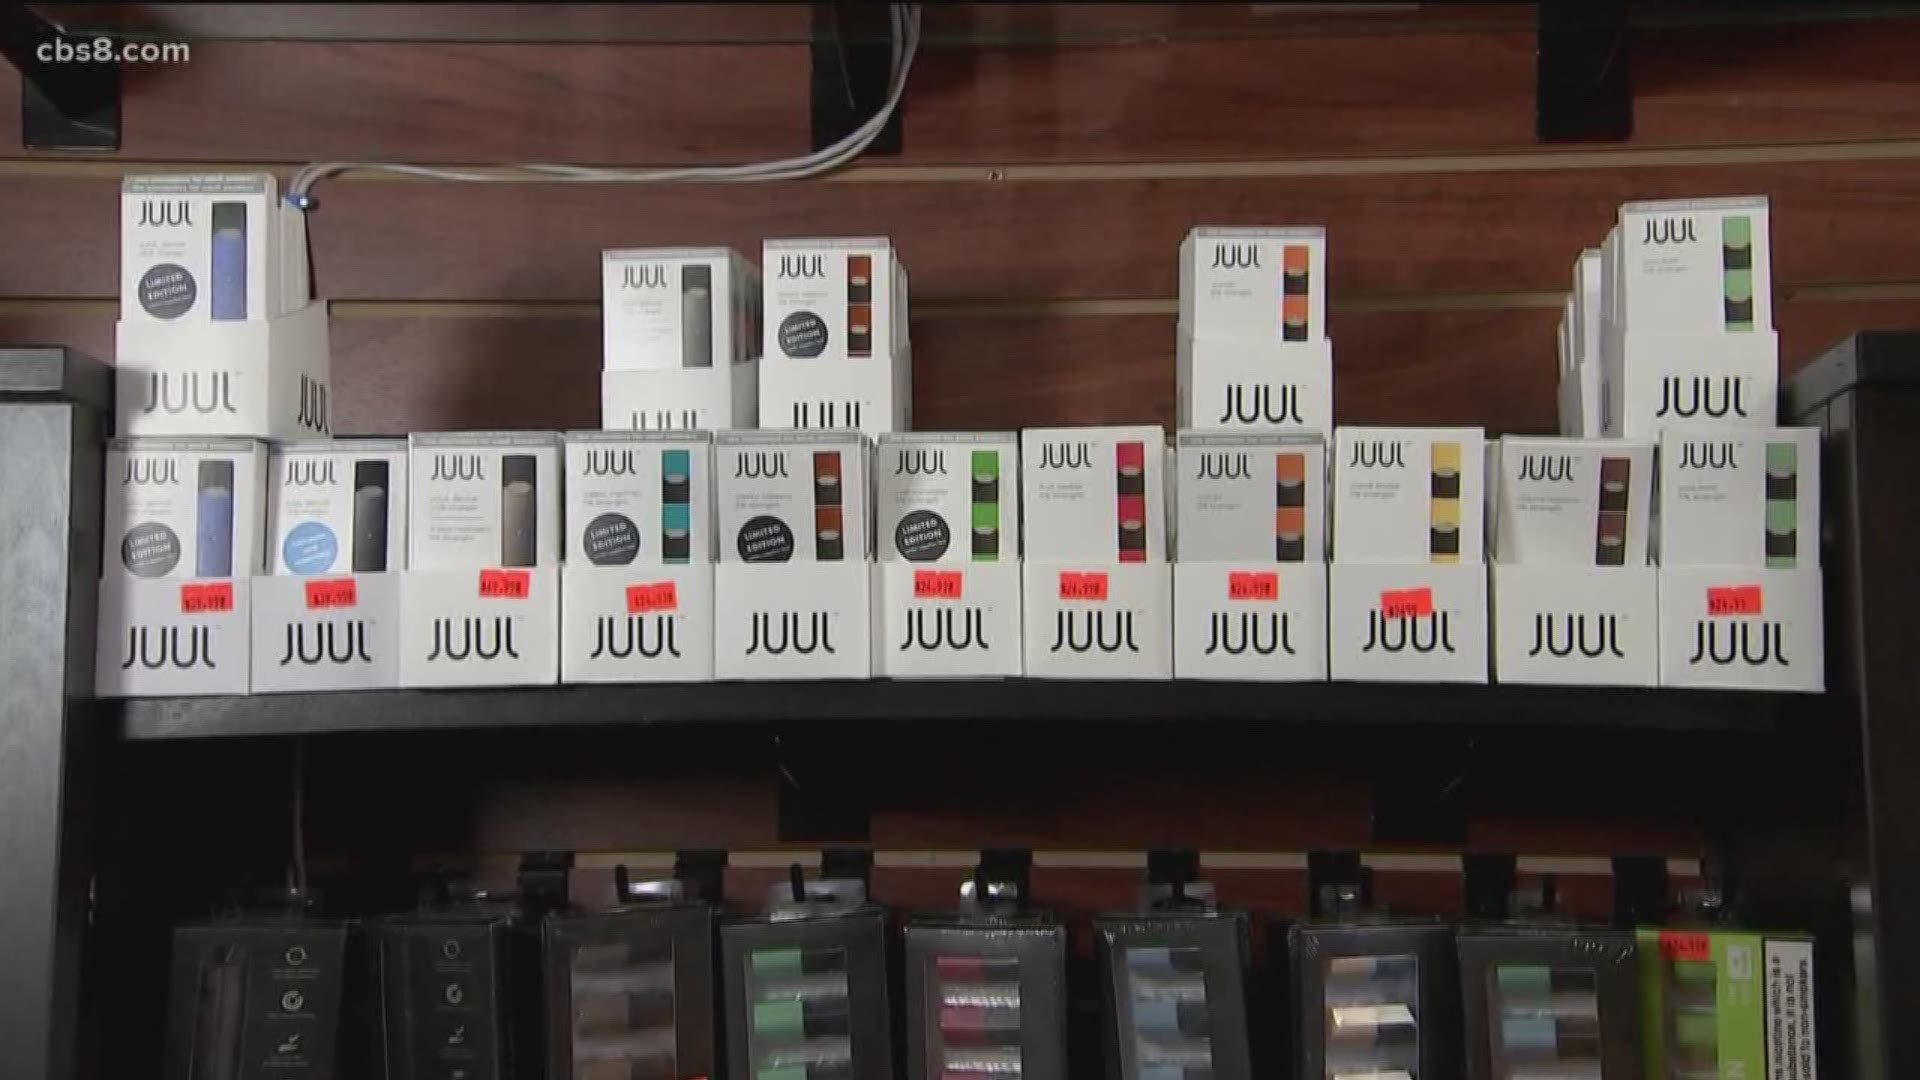 The San Diego Unified School District is suing Juul for marketing its electronic cigarettes and related products to children.